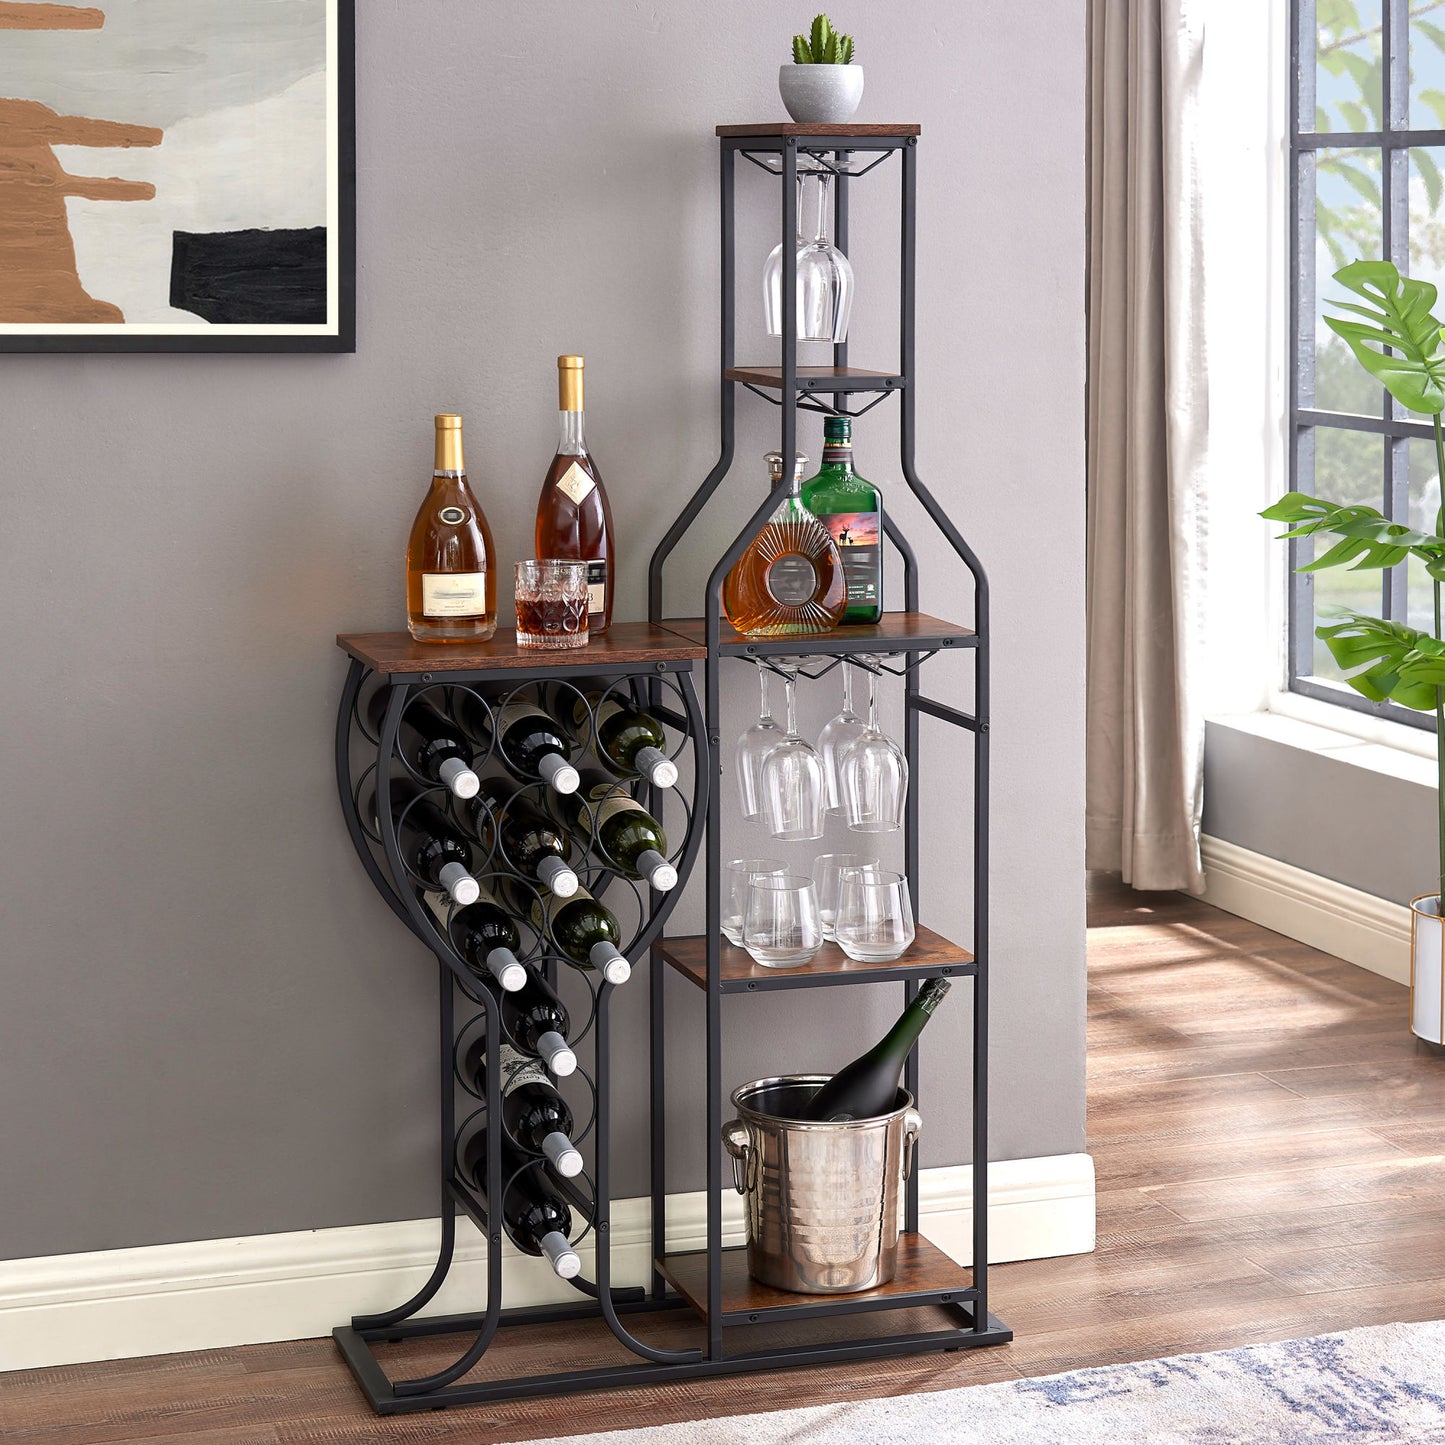 Unique Standing 11 Bottle Wine Rack, 5 Tier Freestanding Wine Rack with Hanging Wine Glass Holder and Storage Shelves, Wine Storage Home Bar for Liquor and Wine Storagefor Kitchen, Dining Room